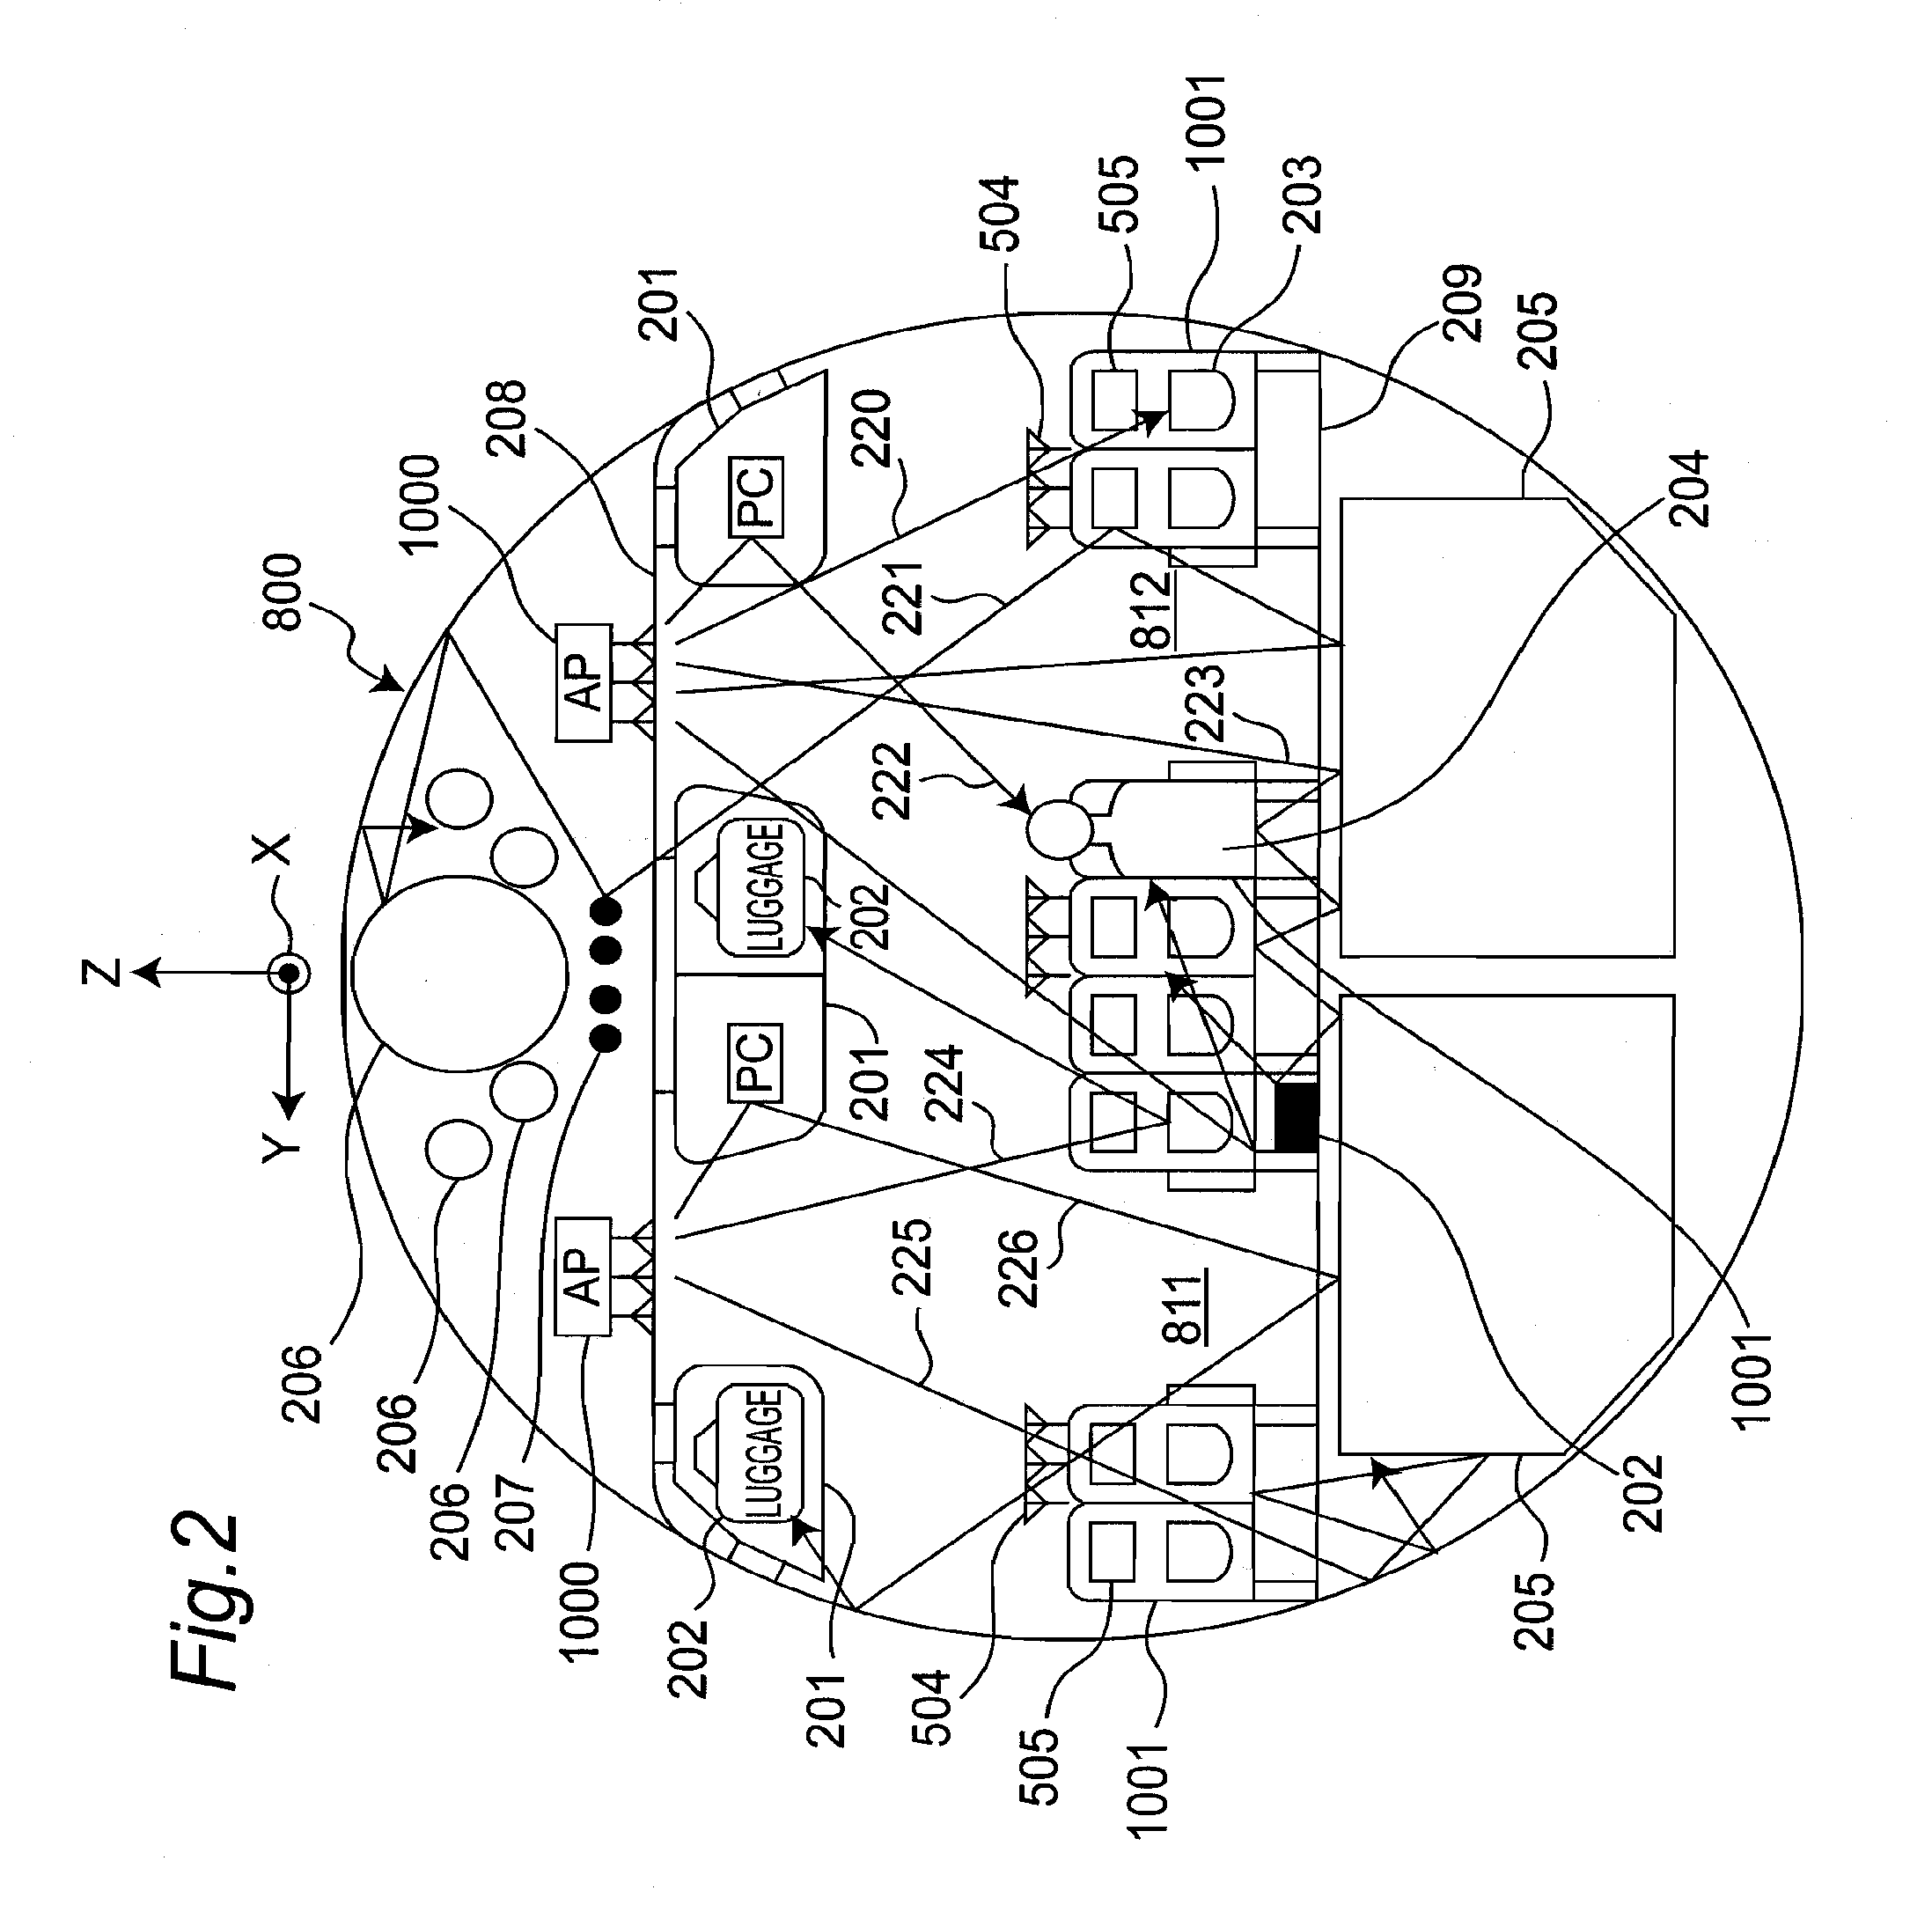 Wireless communication system provided in aircraft for communicating using plural wireless channels